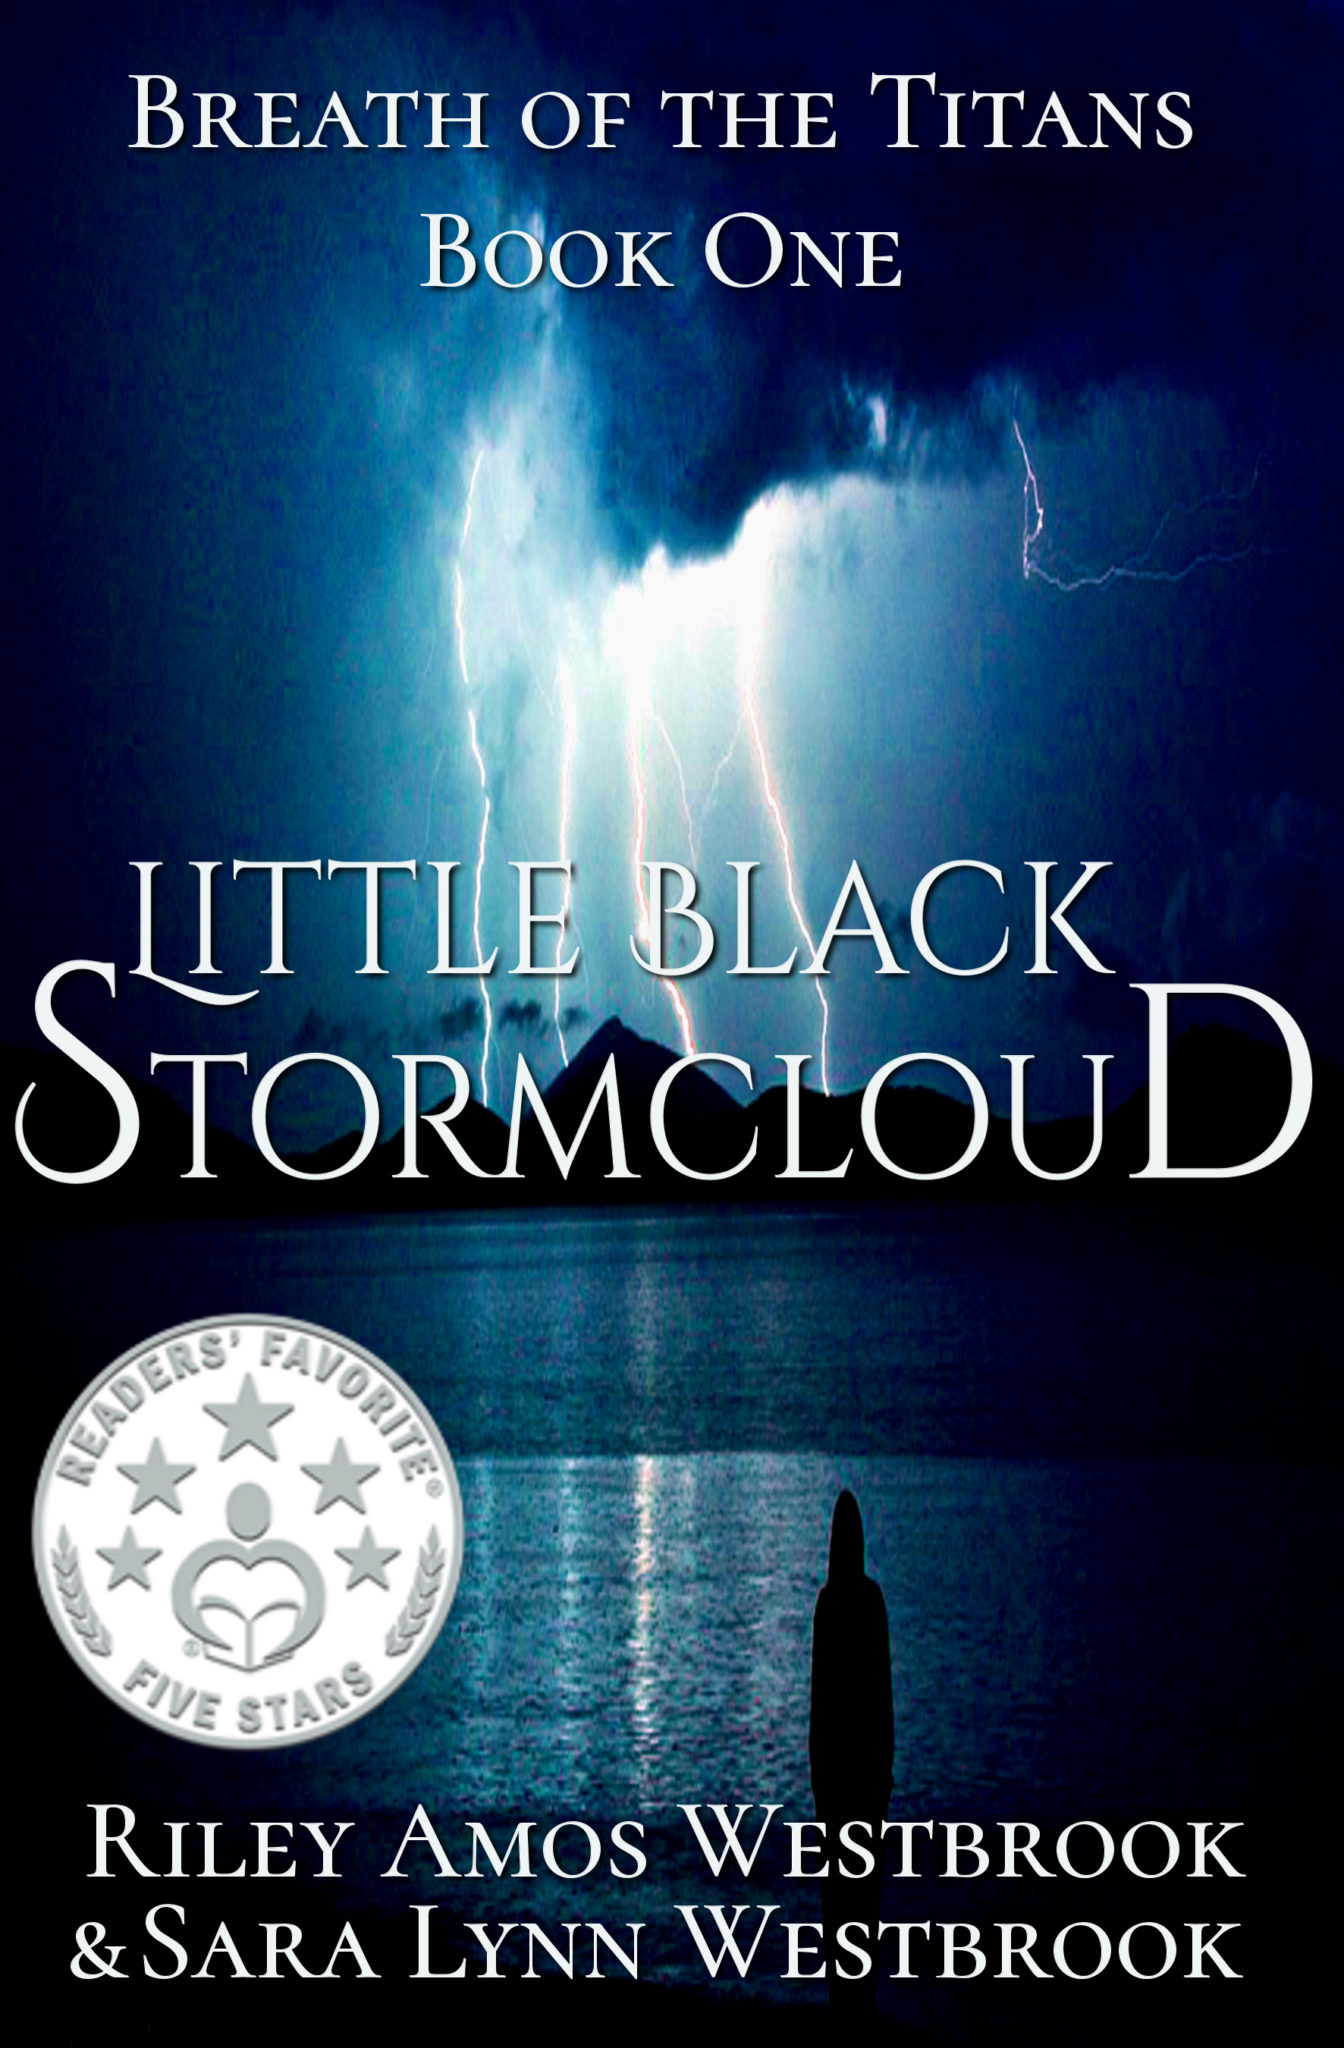 FREE: Breath of the Titans: Little Black Stormcloud by Riley Amos Westbrook and Sara Lynn Westbrook